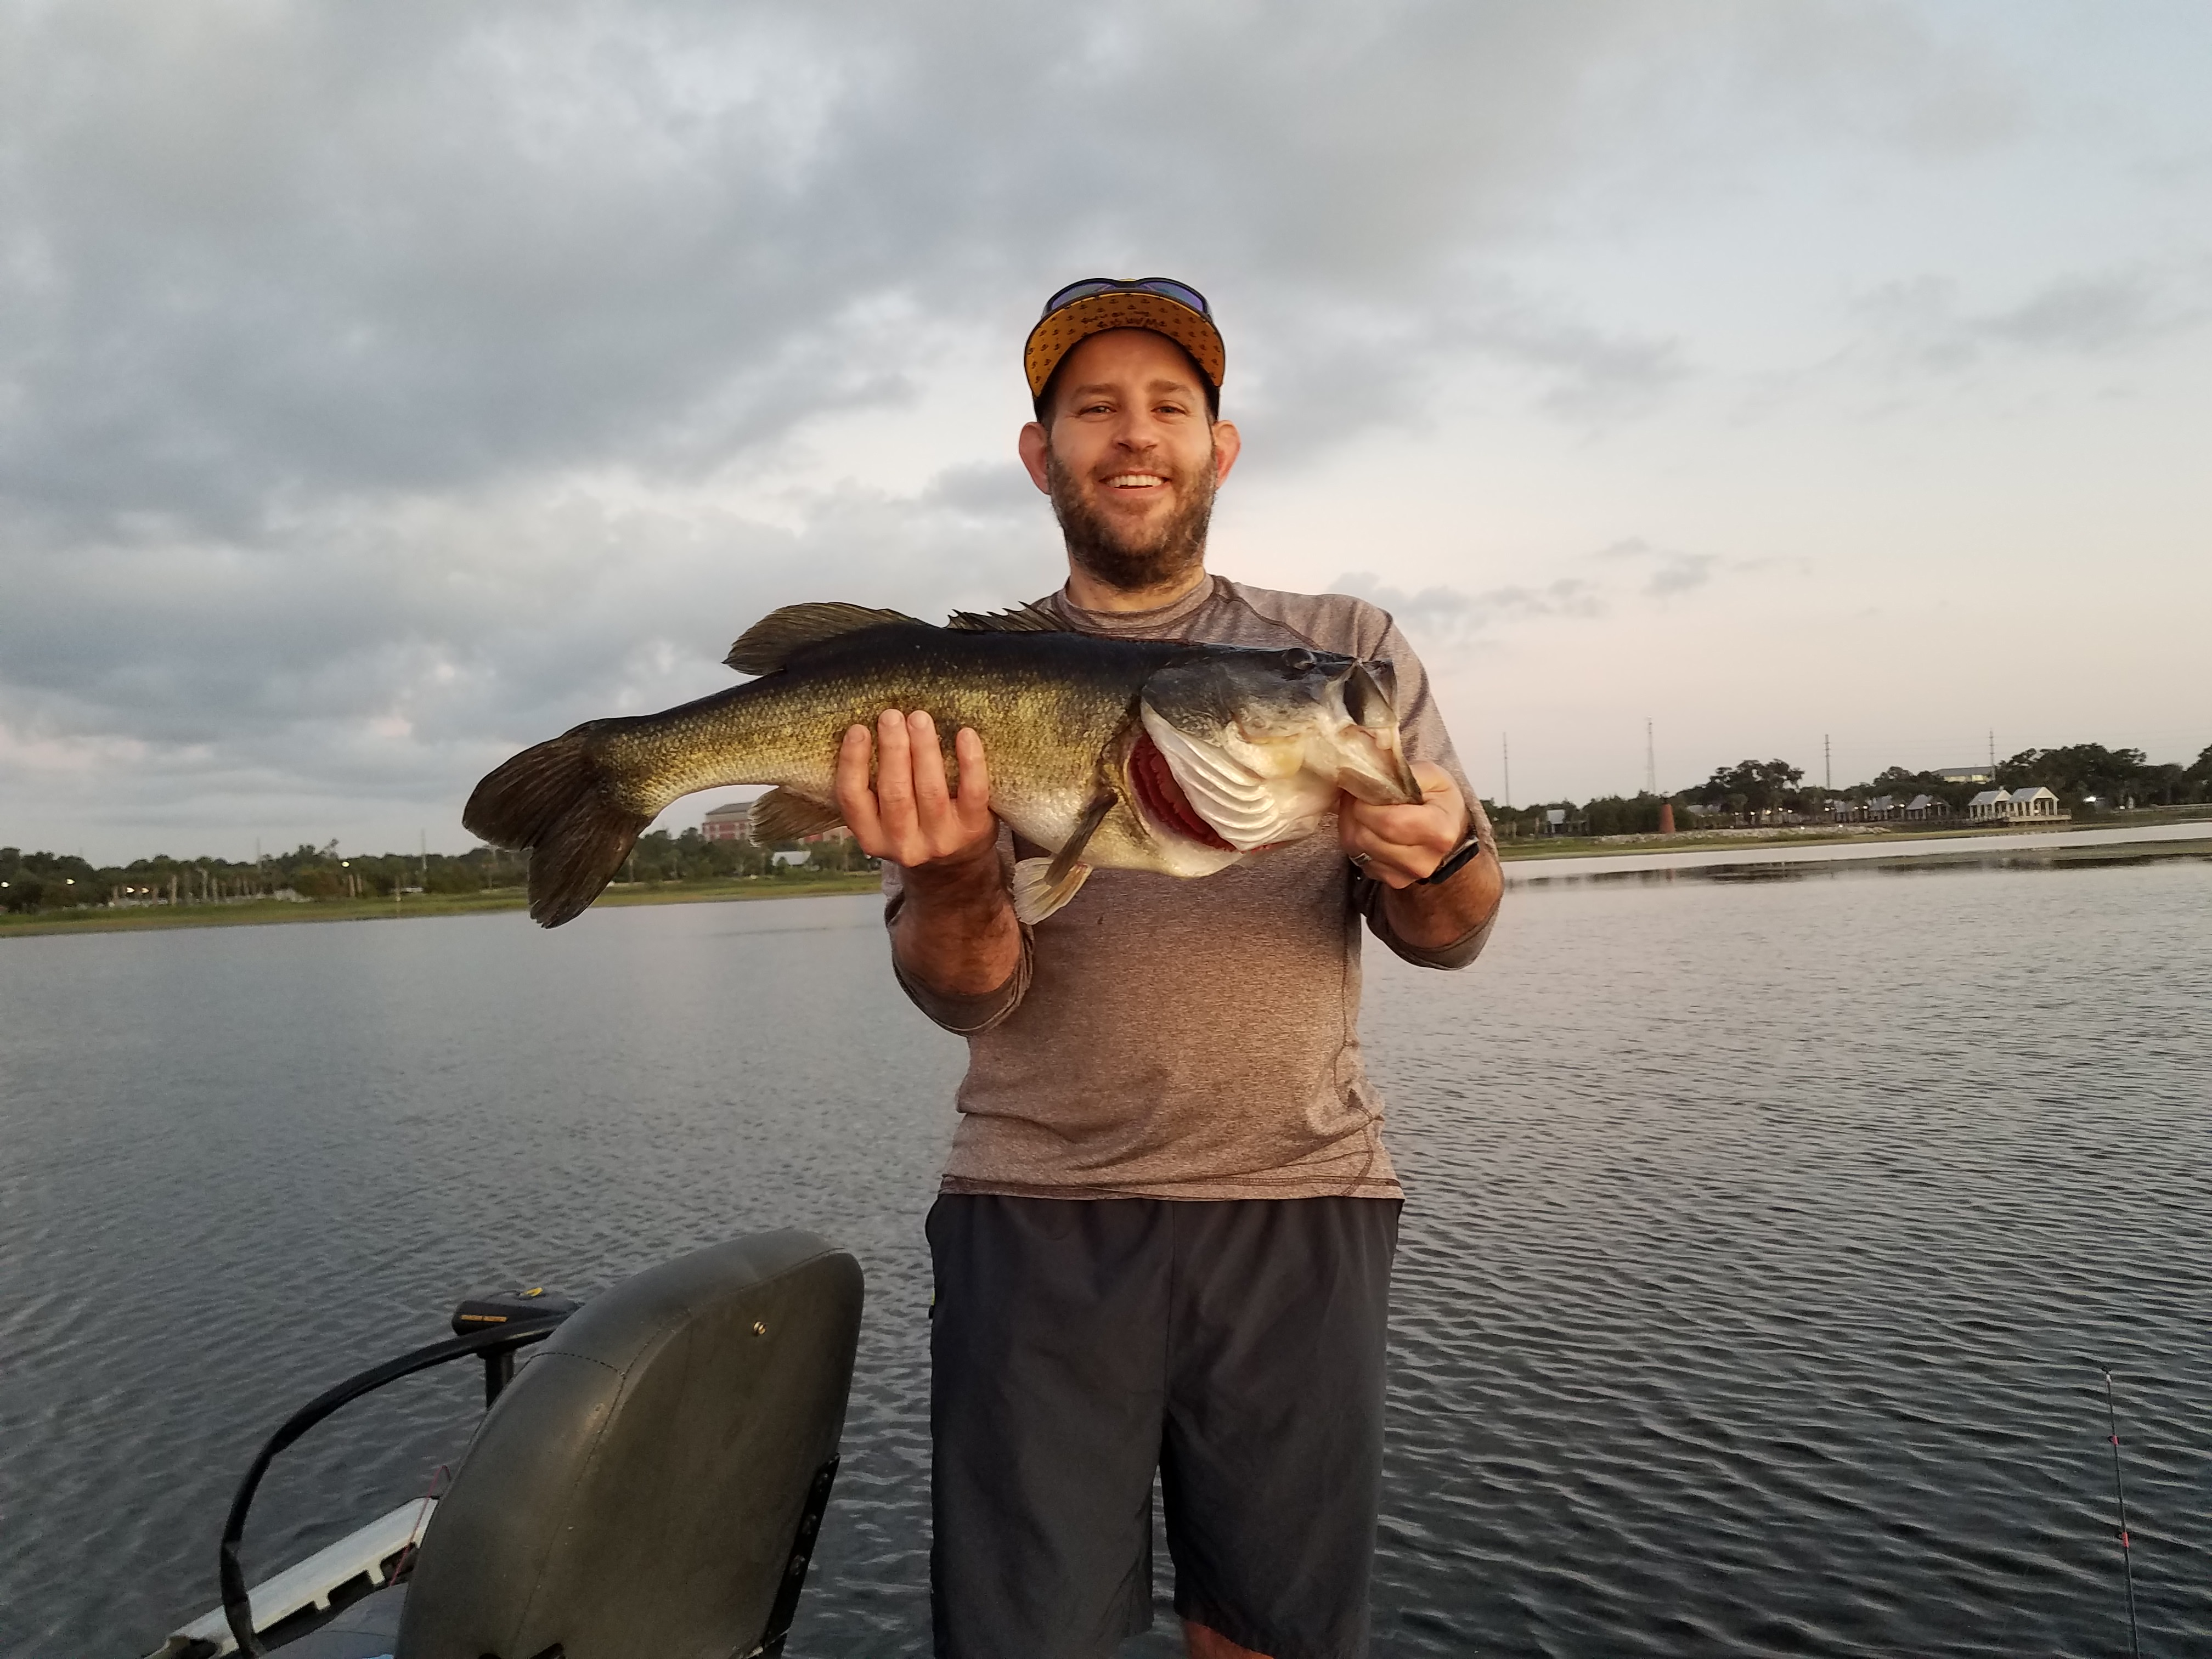 Thoughts on this Texas-rig setup for bed fishing? : r/bassfishing